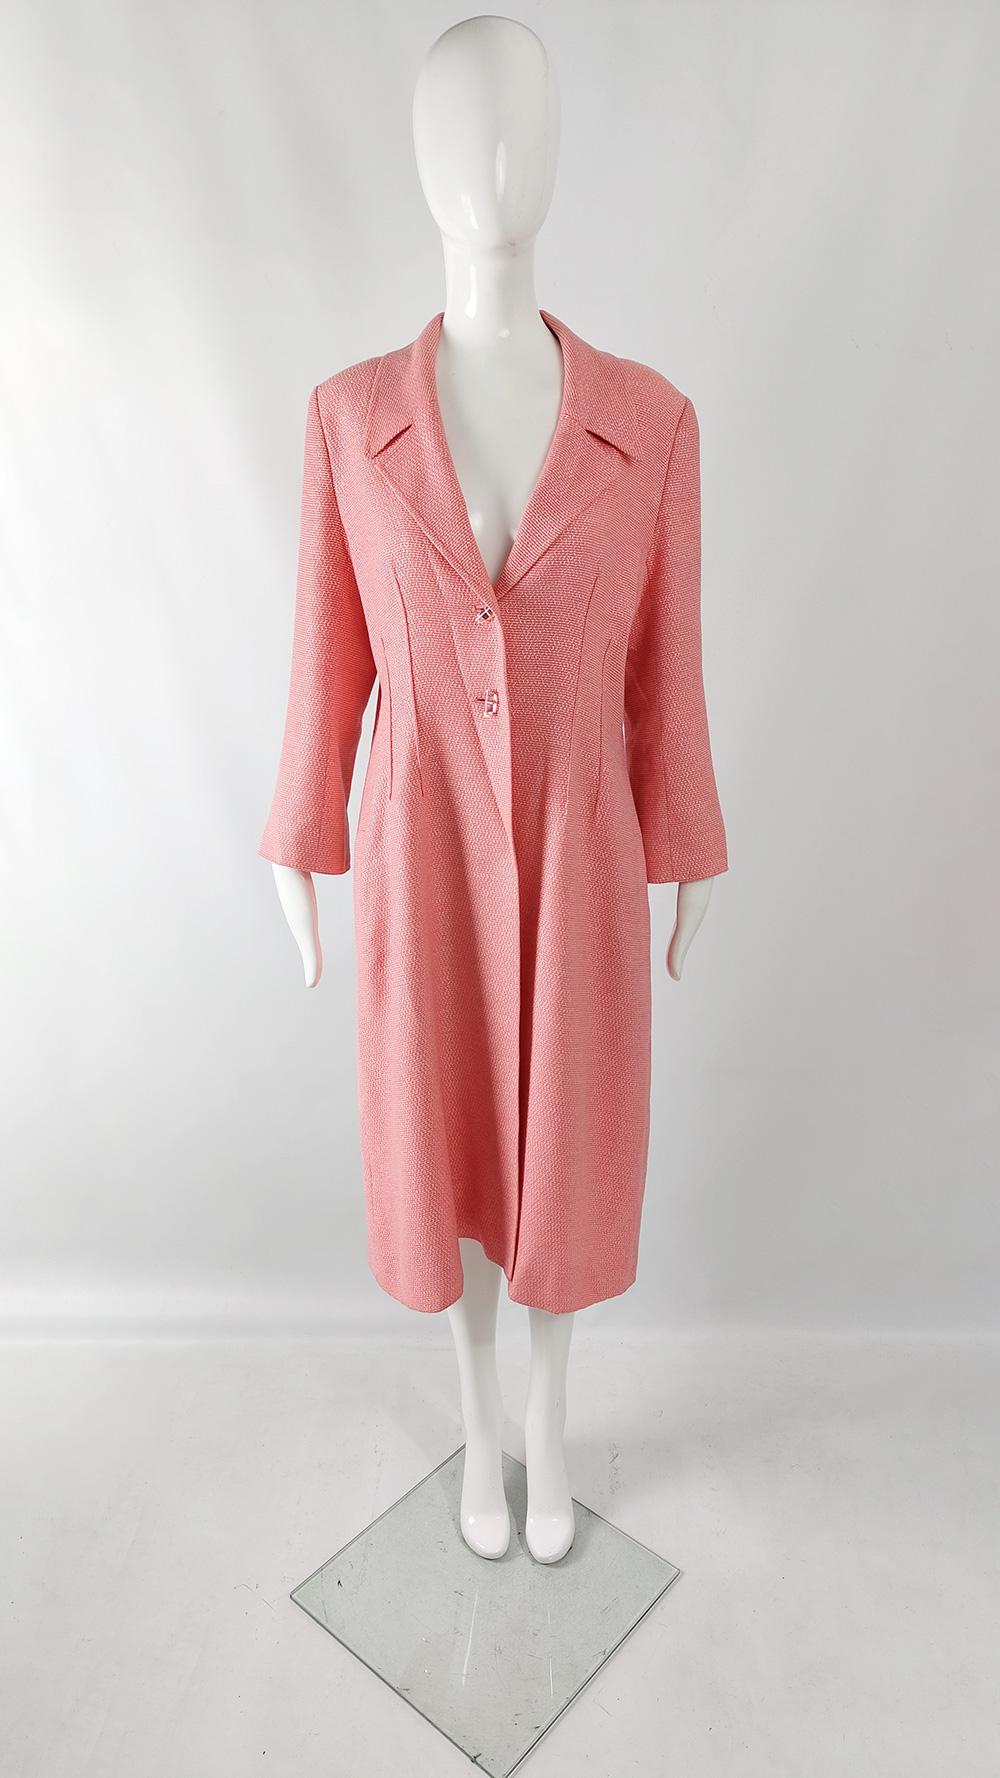 A fantastic vintage womens maxi coat from the 90s by luxury British fashion designer, Jean Muir. Known for her understated, minimalist designs in luxury fabrics that appealed to her sophisticated clientele, including Lauren Baccall, Judi Dench and